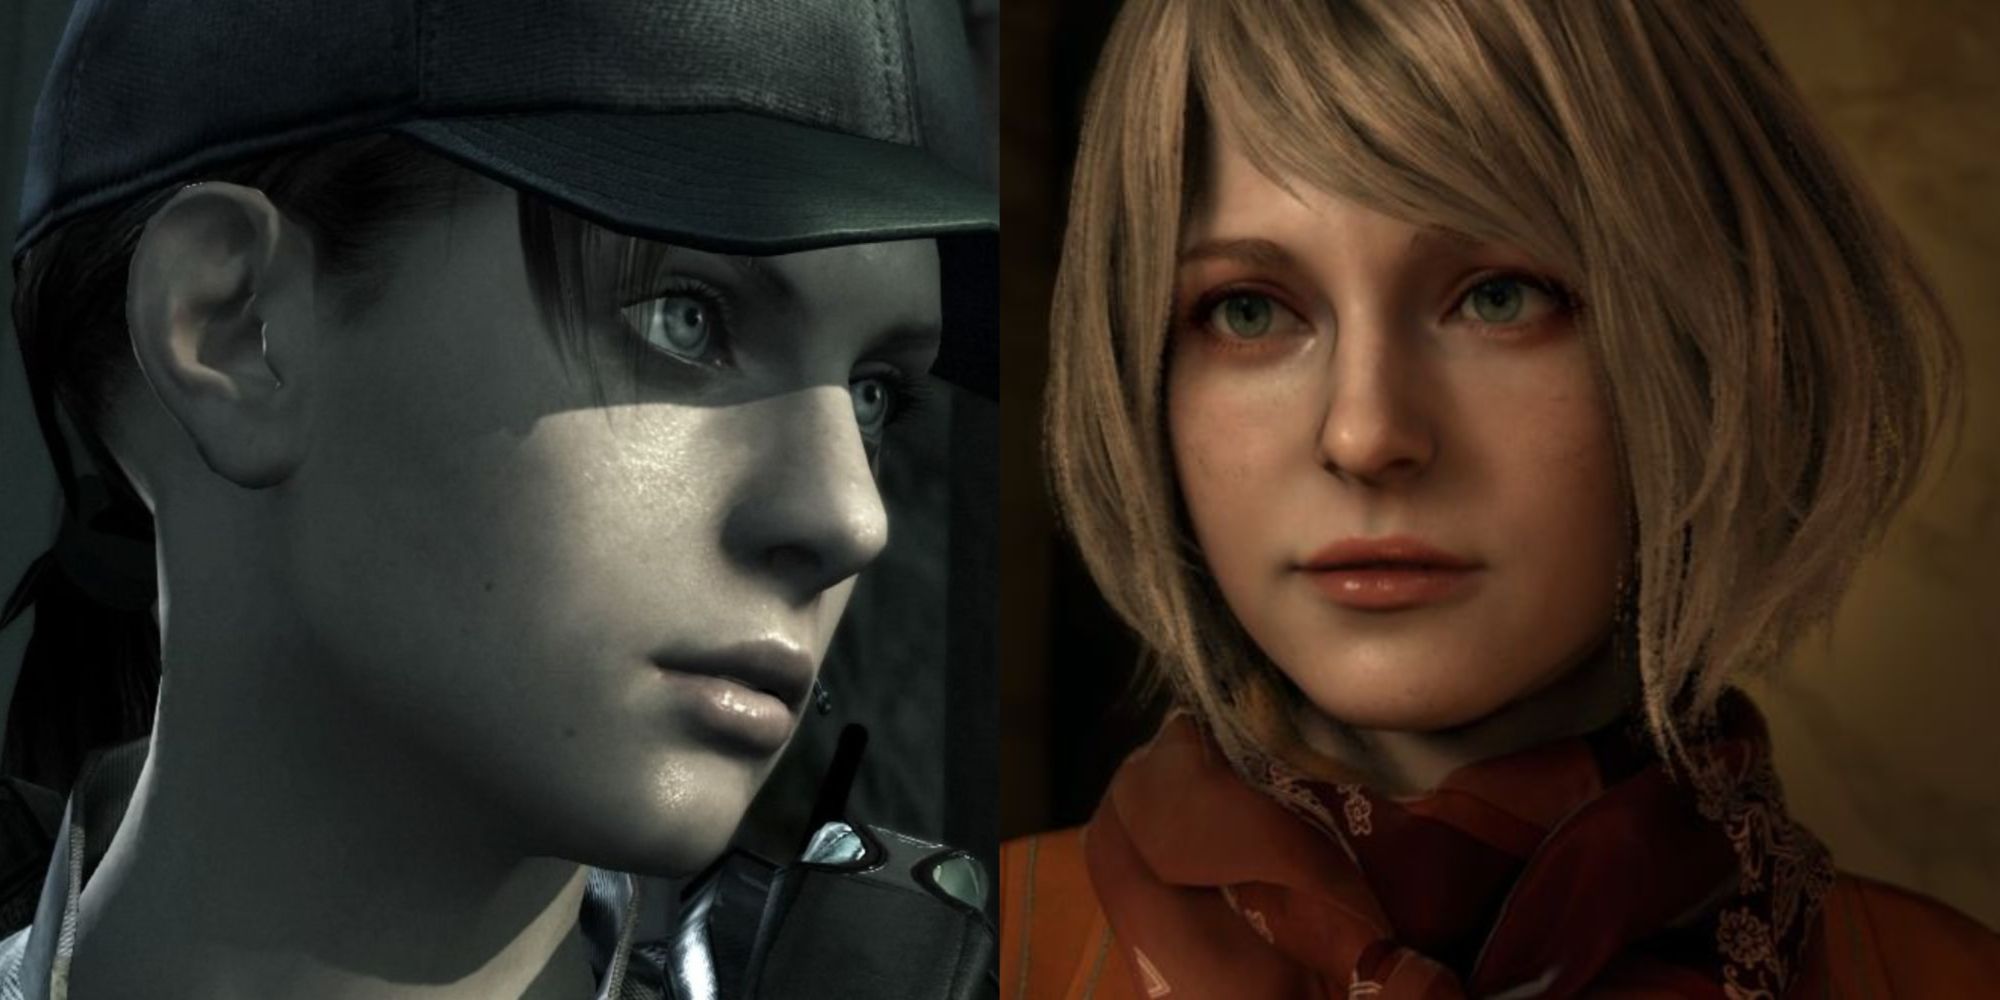 Resident Evil Timeline Explained: From RE1 to Village